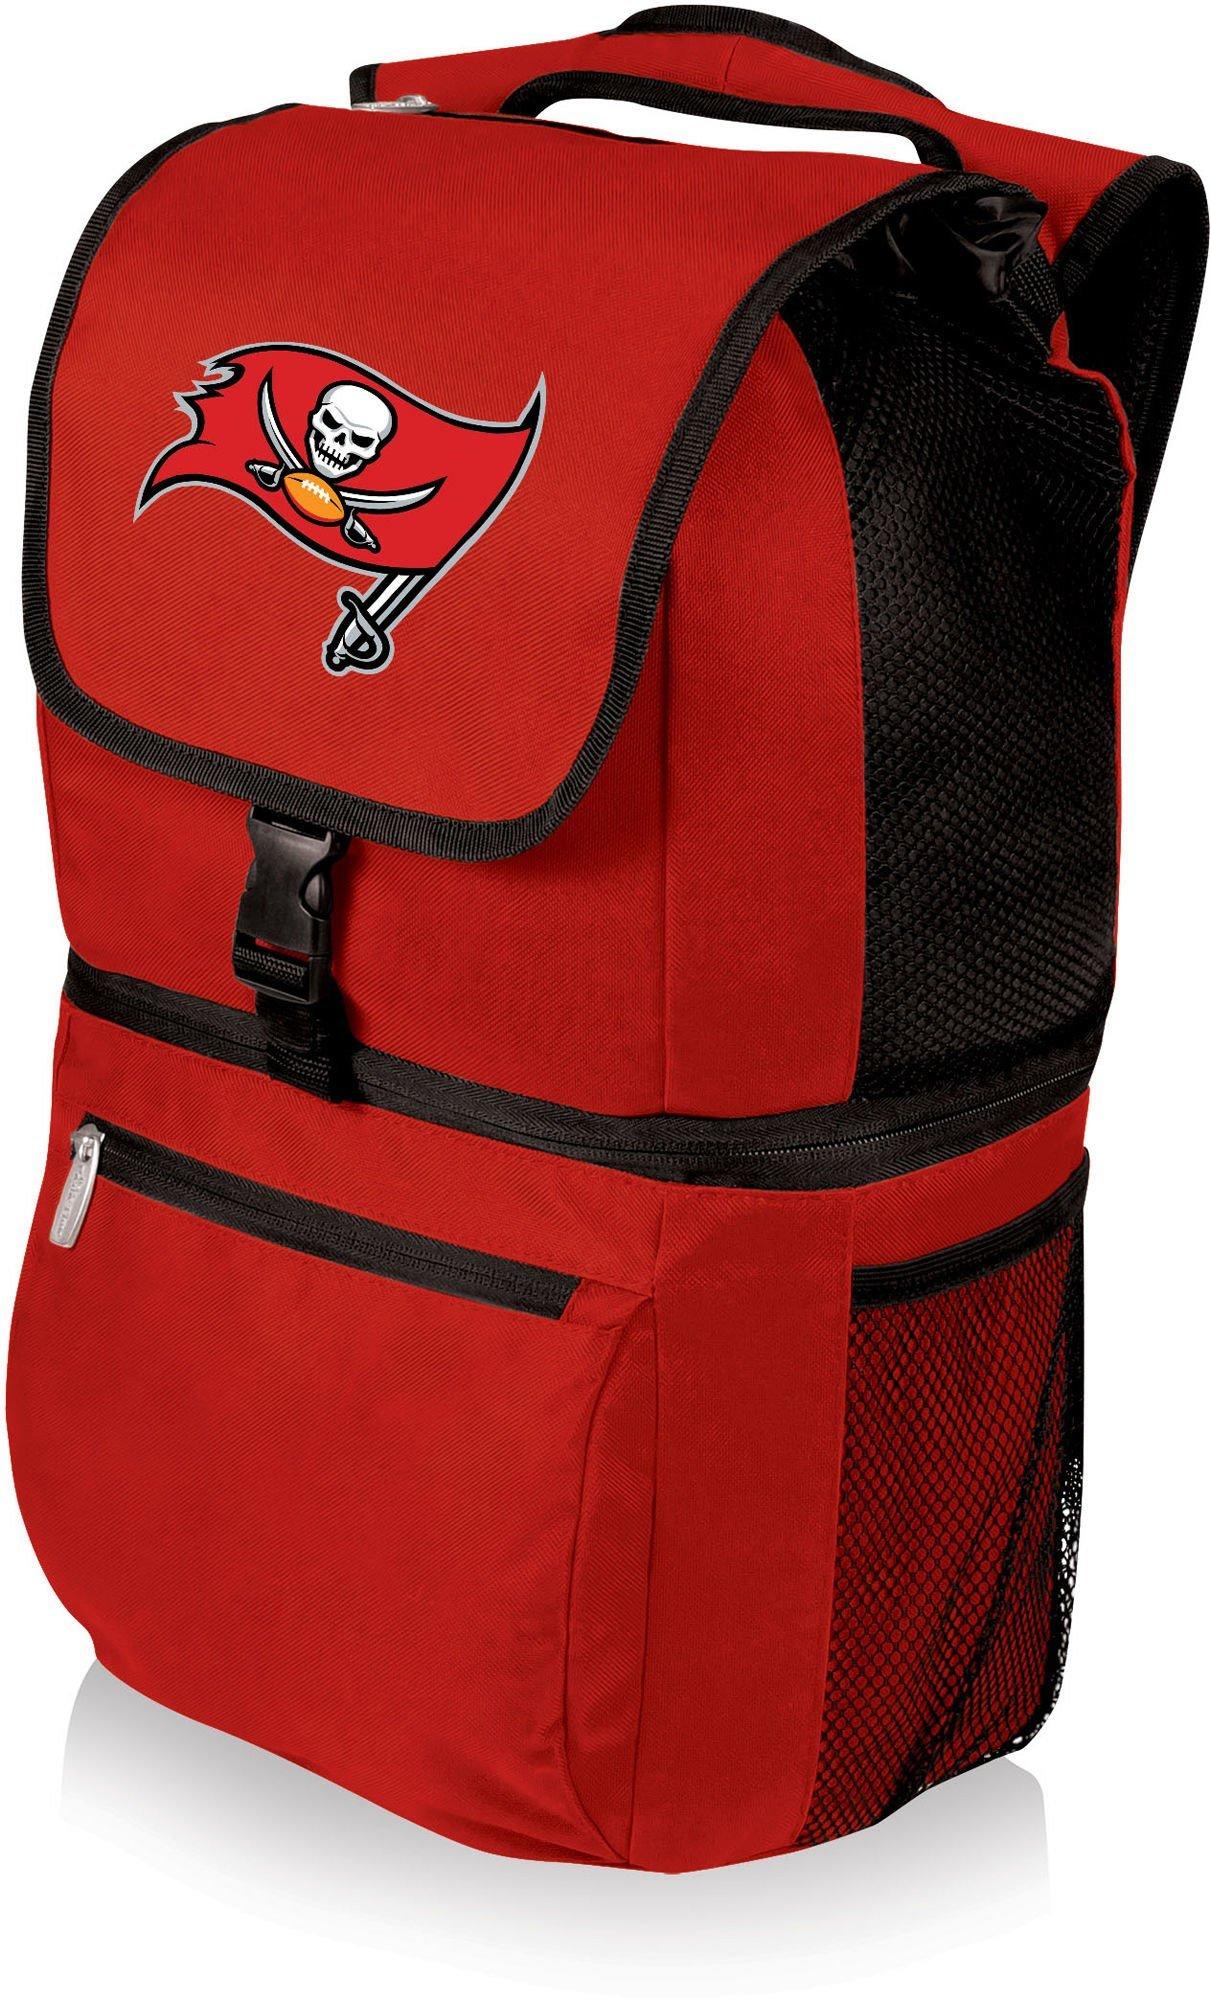 Tampa Bay Buccaneers Zuma Backpack by Oniva